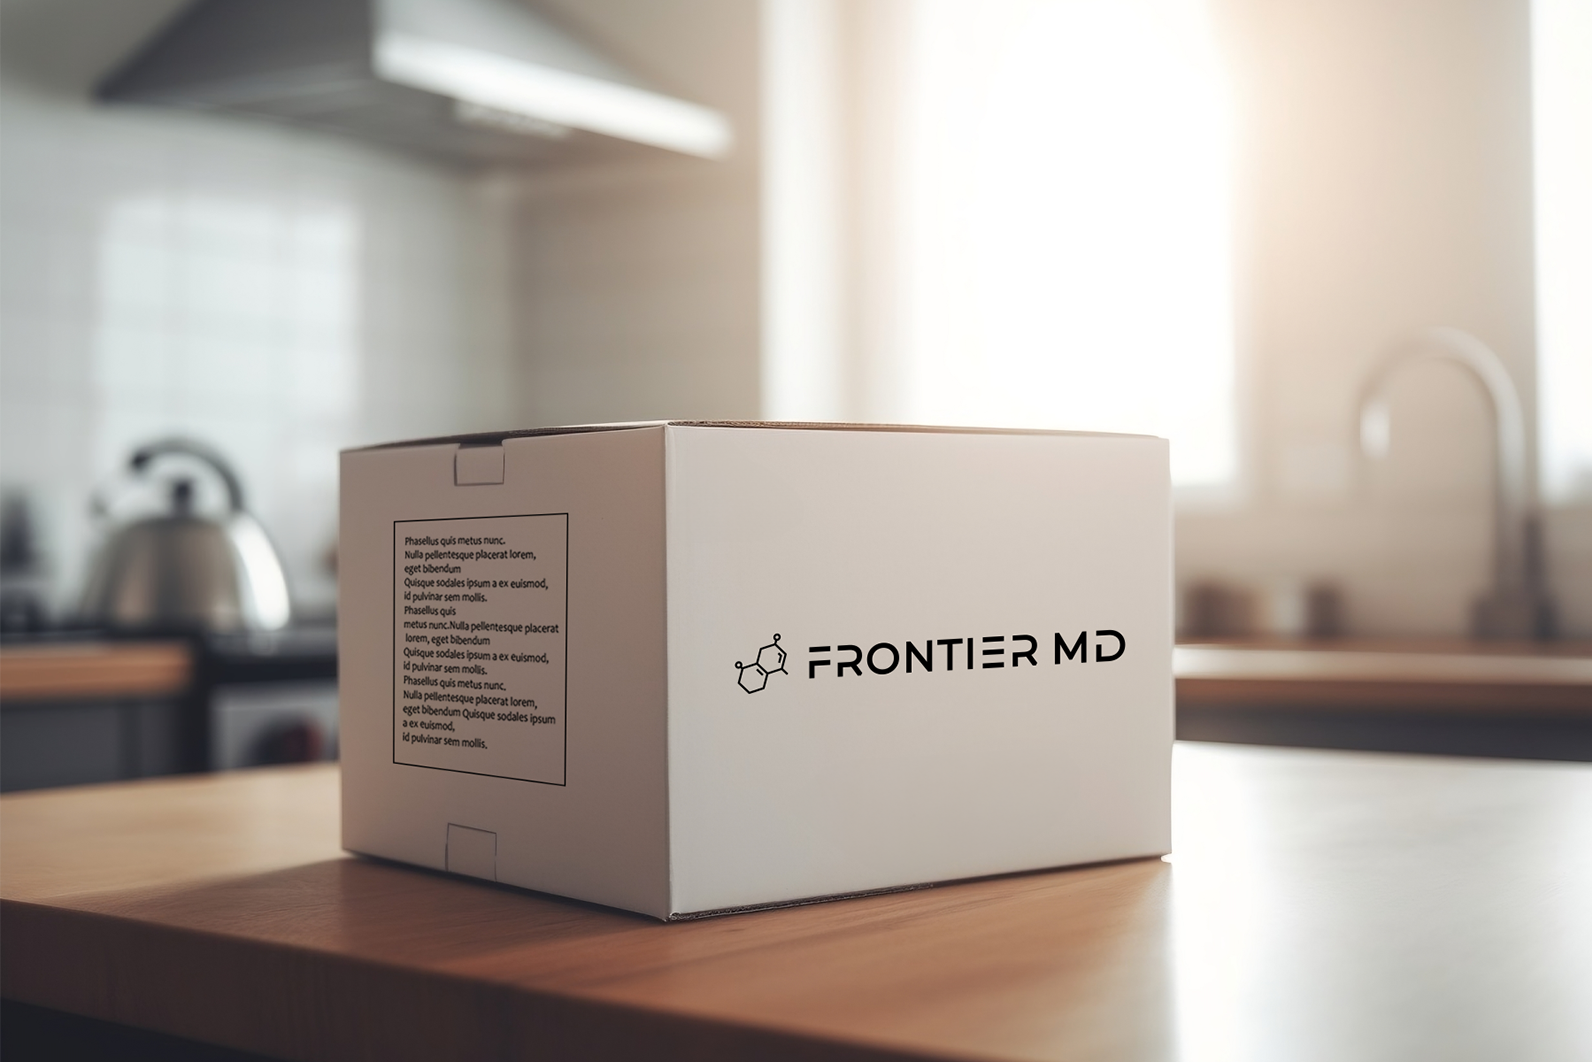 frontier md box containing personalized treatment plan and medication vitamins supplements